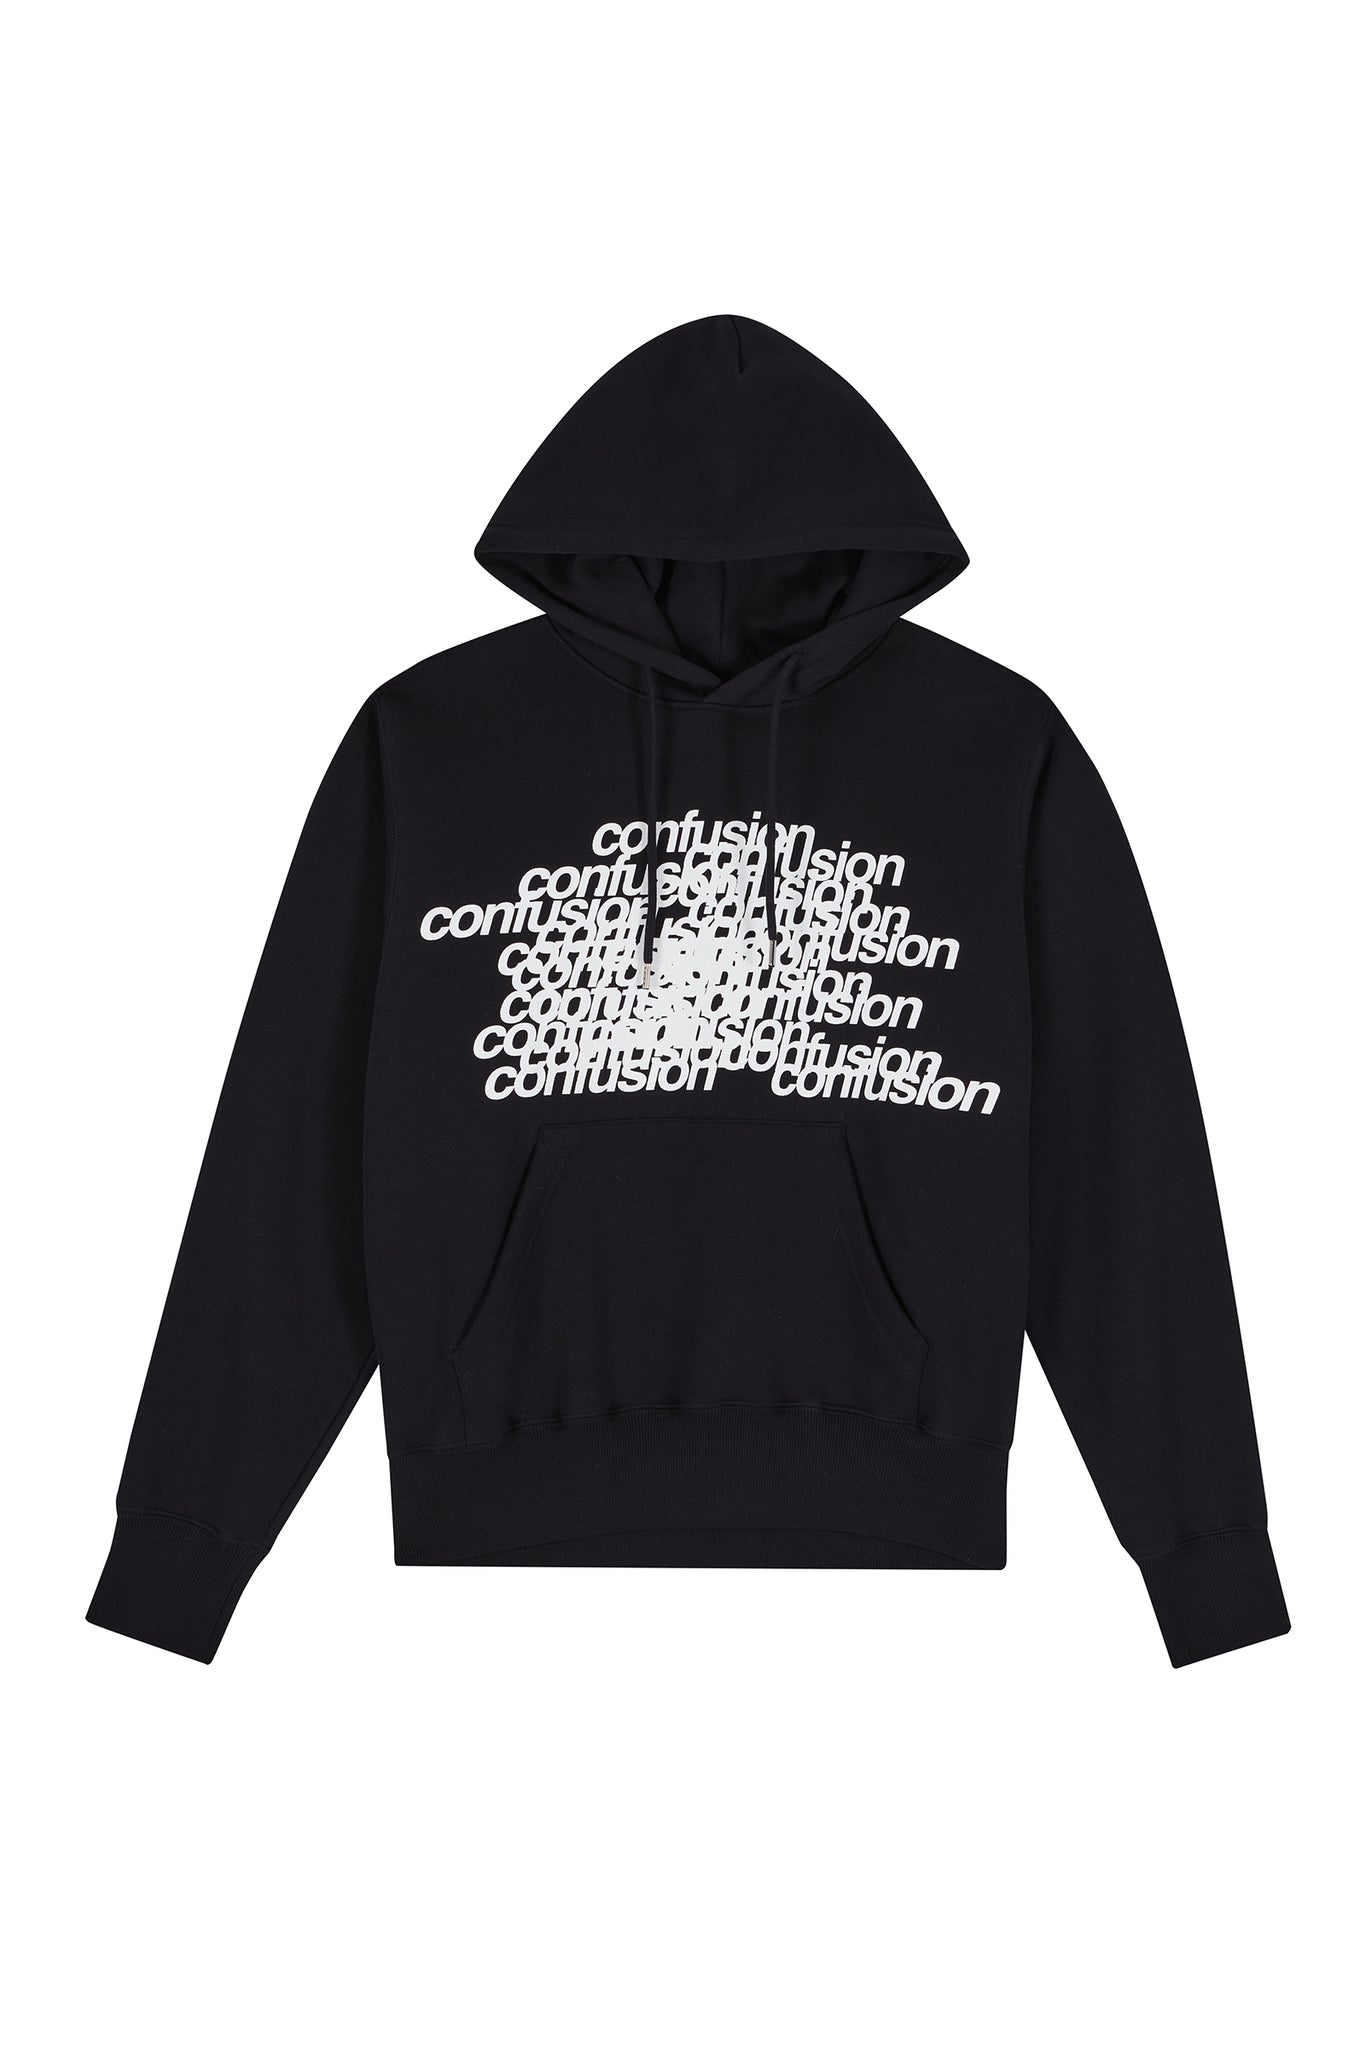 THE "CONFUSION" PRINTED HOODIE